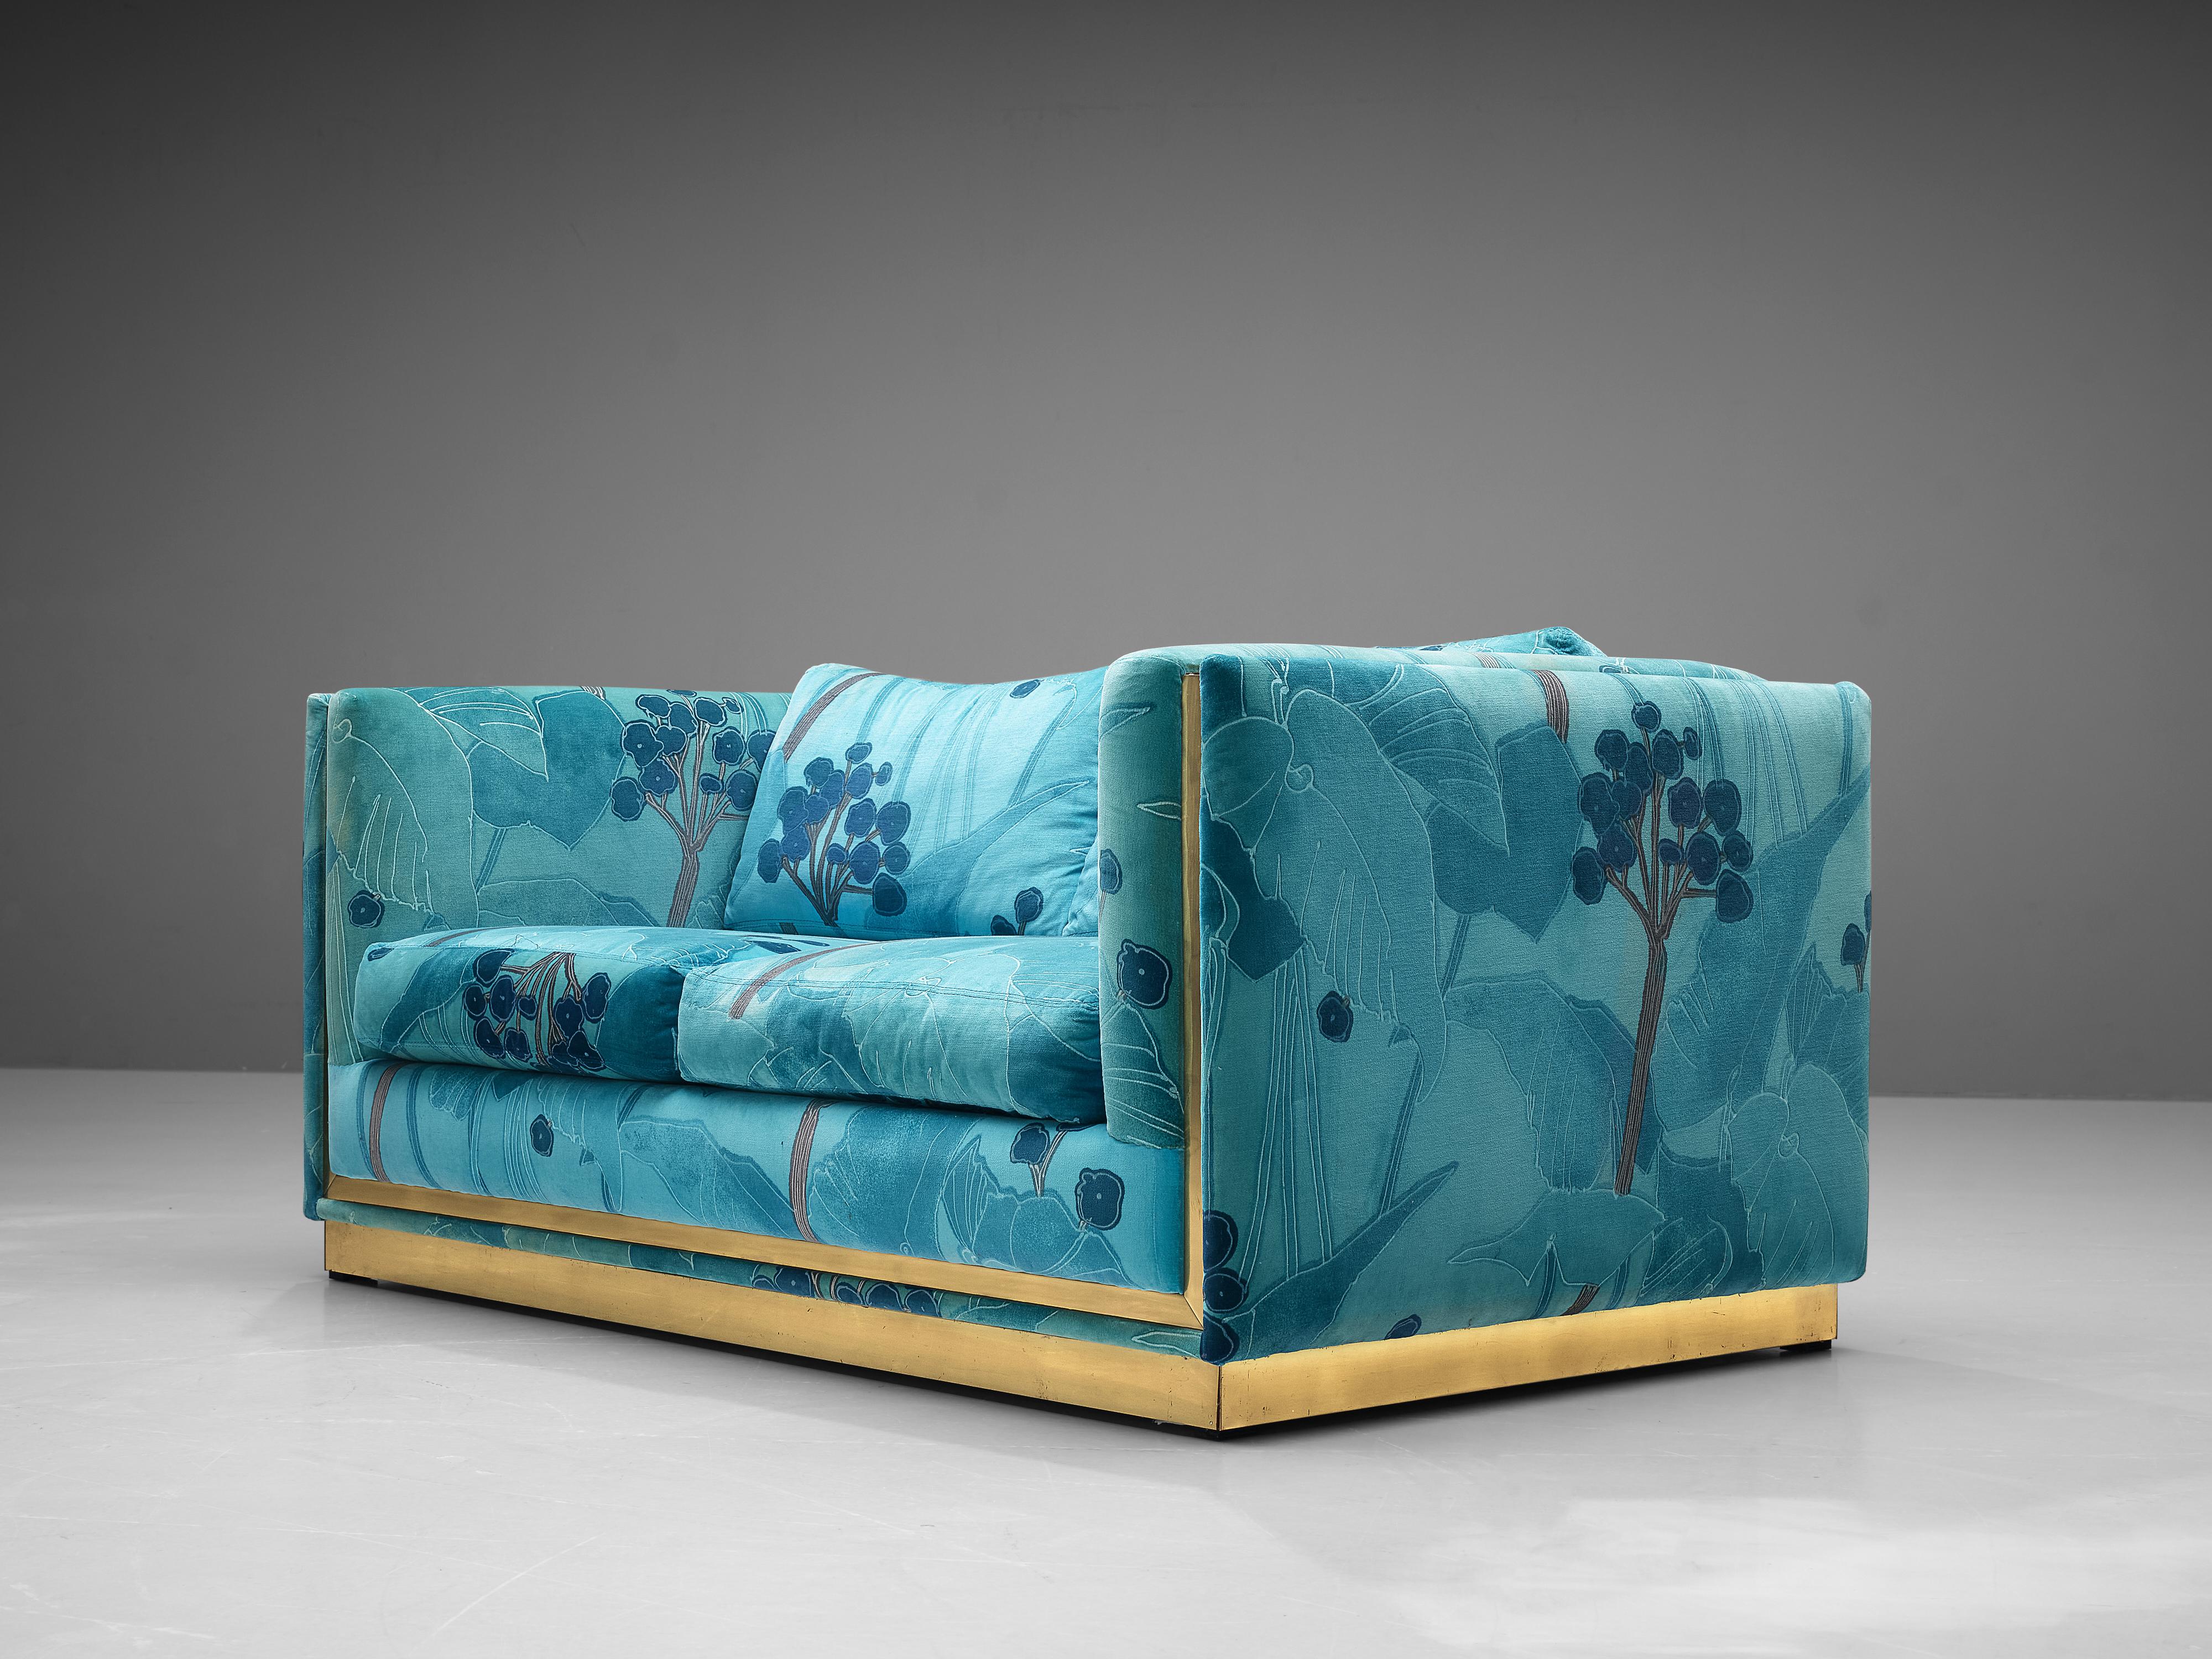 Late 20th Century Italian Two-Seat Sofa in Blue and Turquoise Flower Upholstery